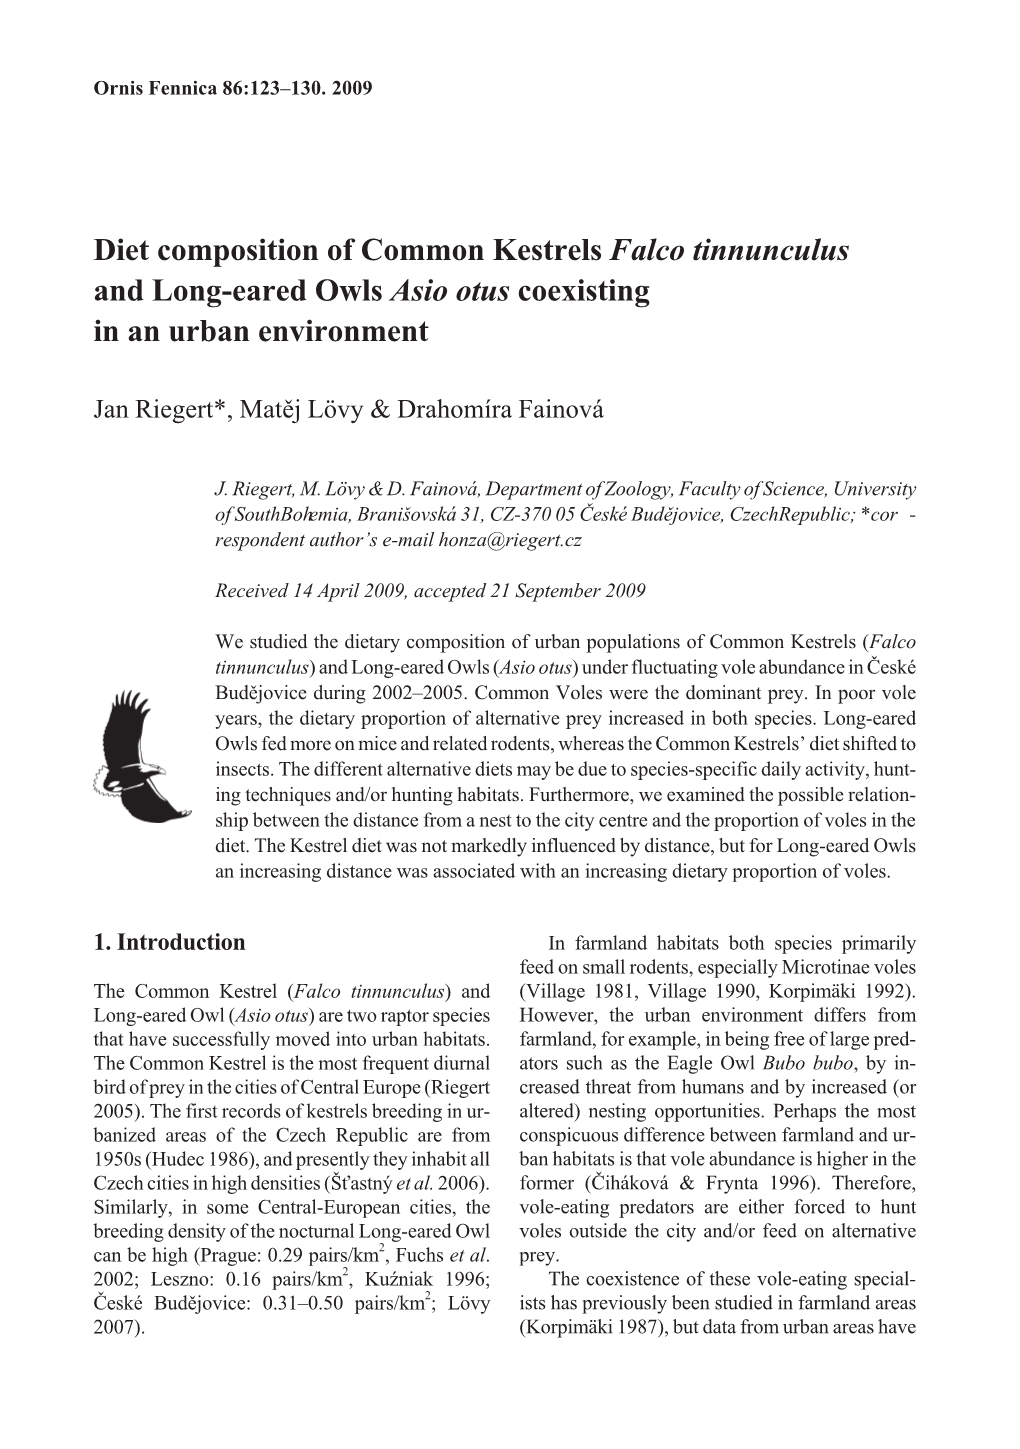 Diet Composition of Common Kestrels Falco Tinnunculus and Long-Eared Owls Asio Otus Coexisting in an Urban Environment